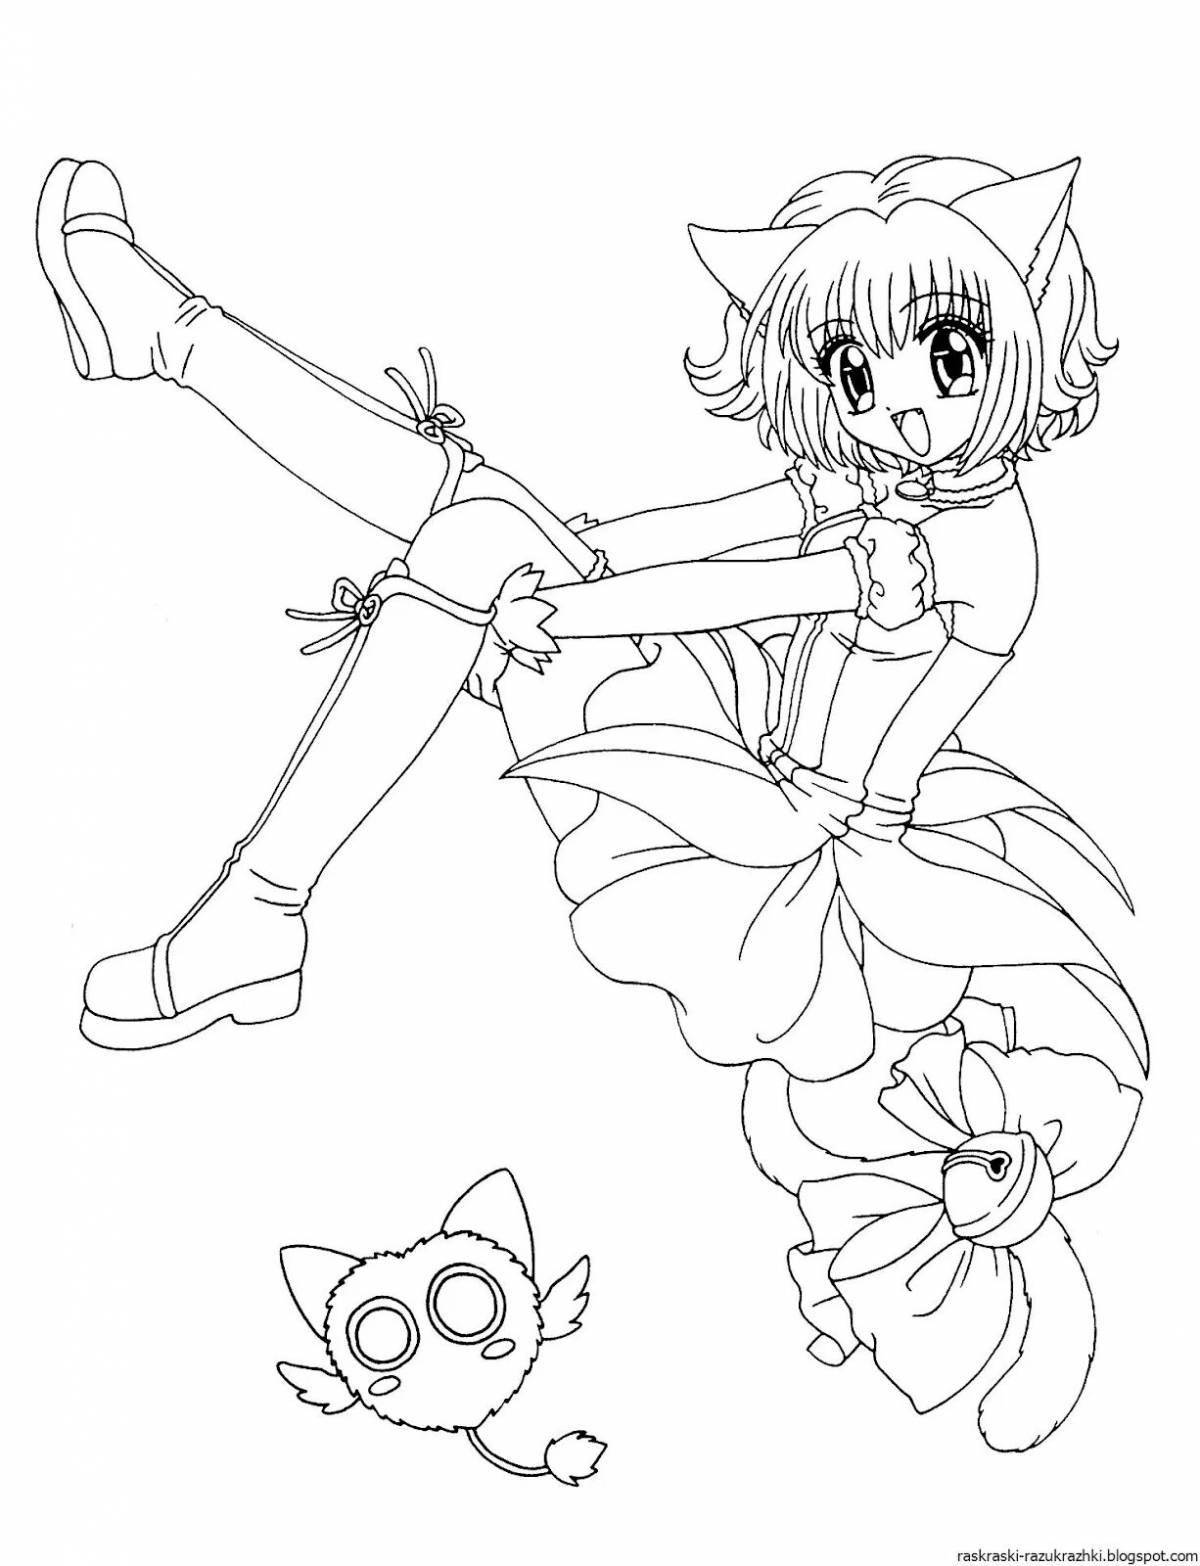 Loving anime kitty coloring page